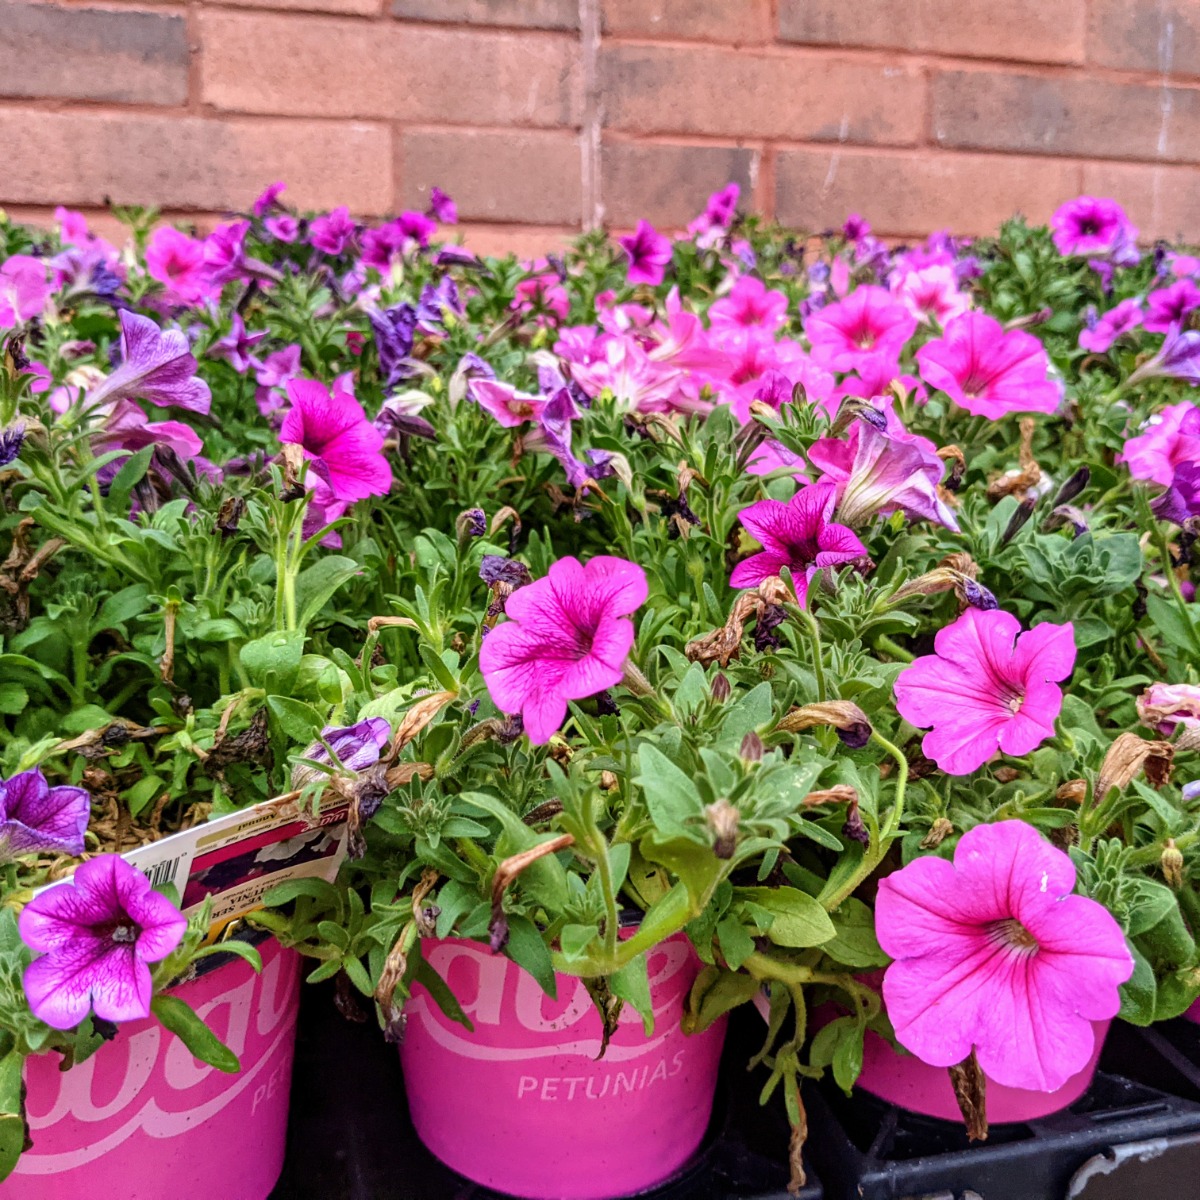 Wave Petunias in shades of pink